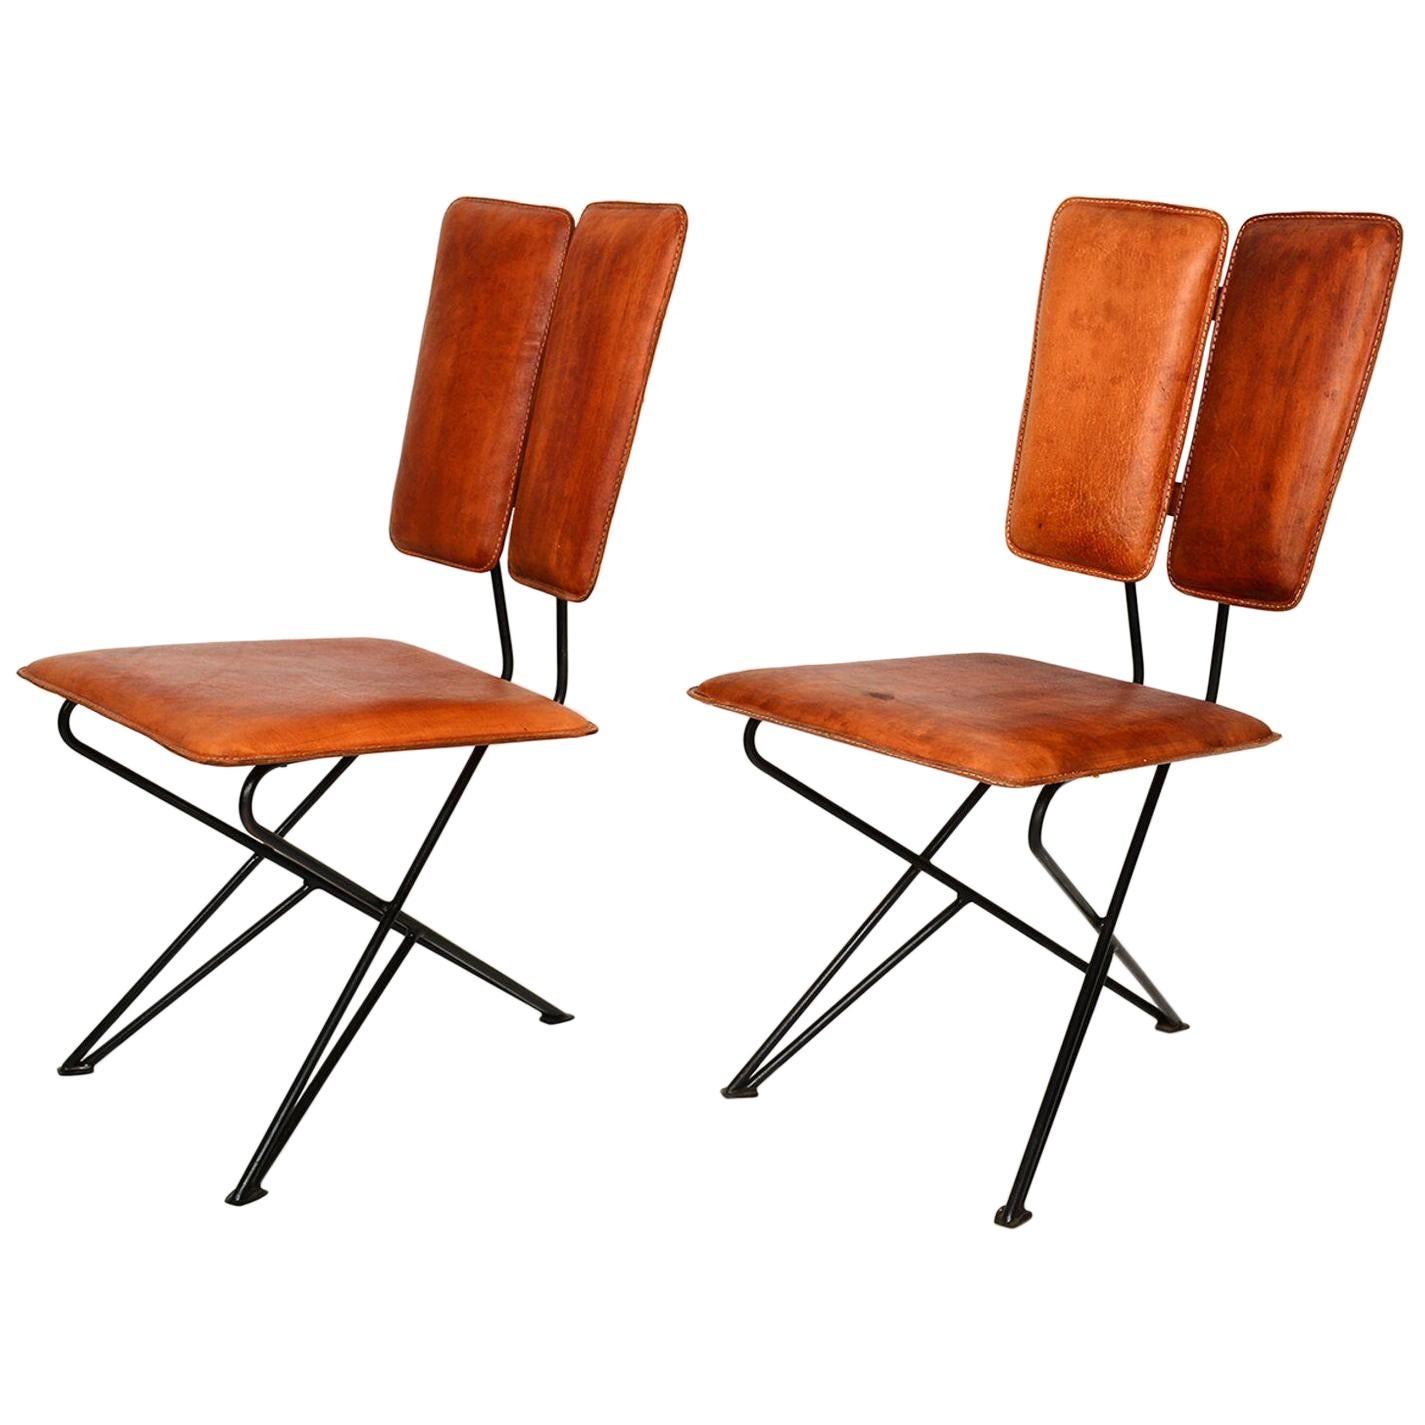 Mid-Century Modern Design Pablex Tripod Chair in Leather by Ambianic